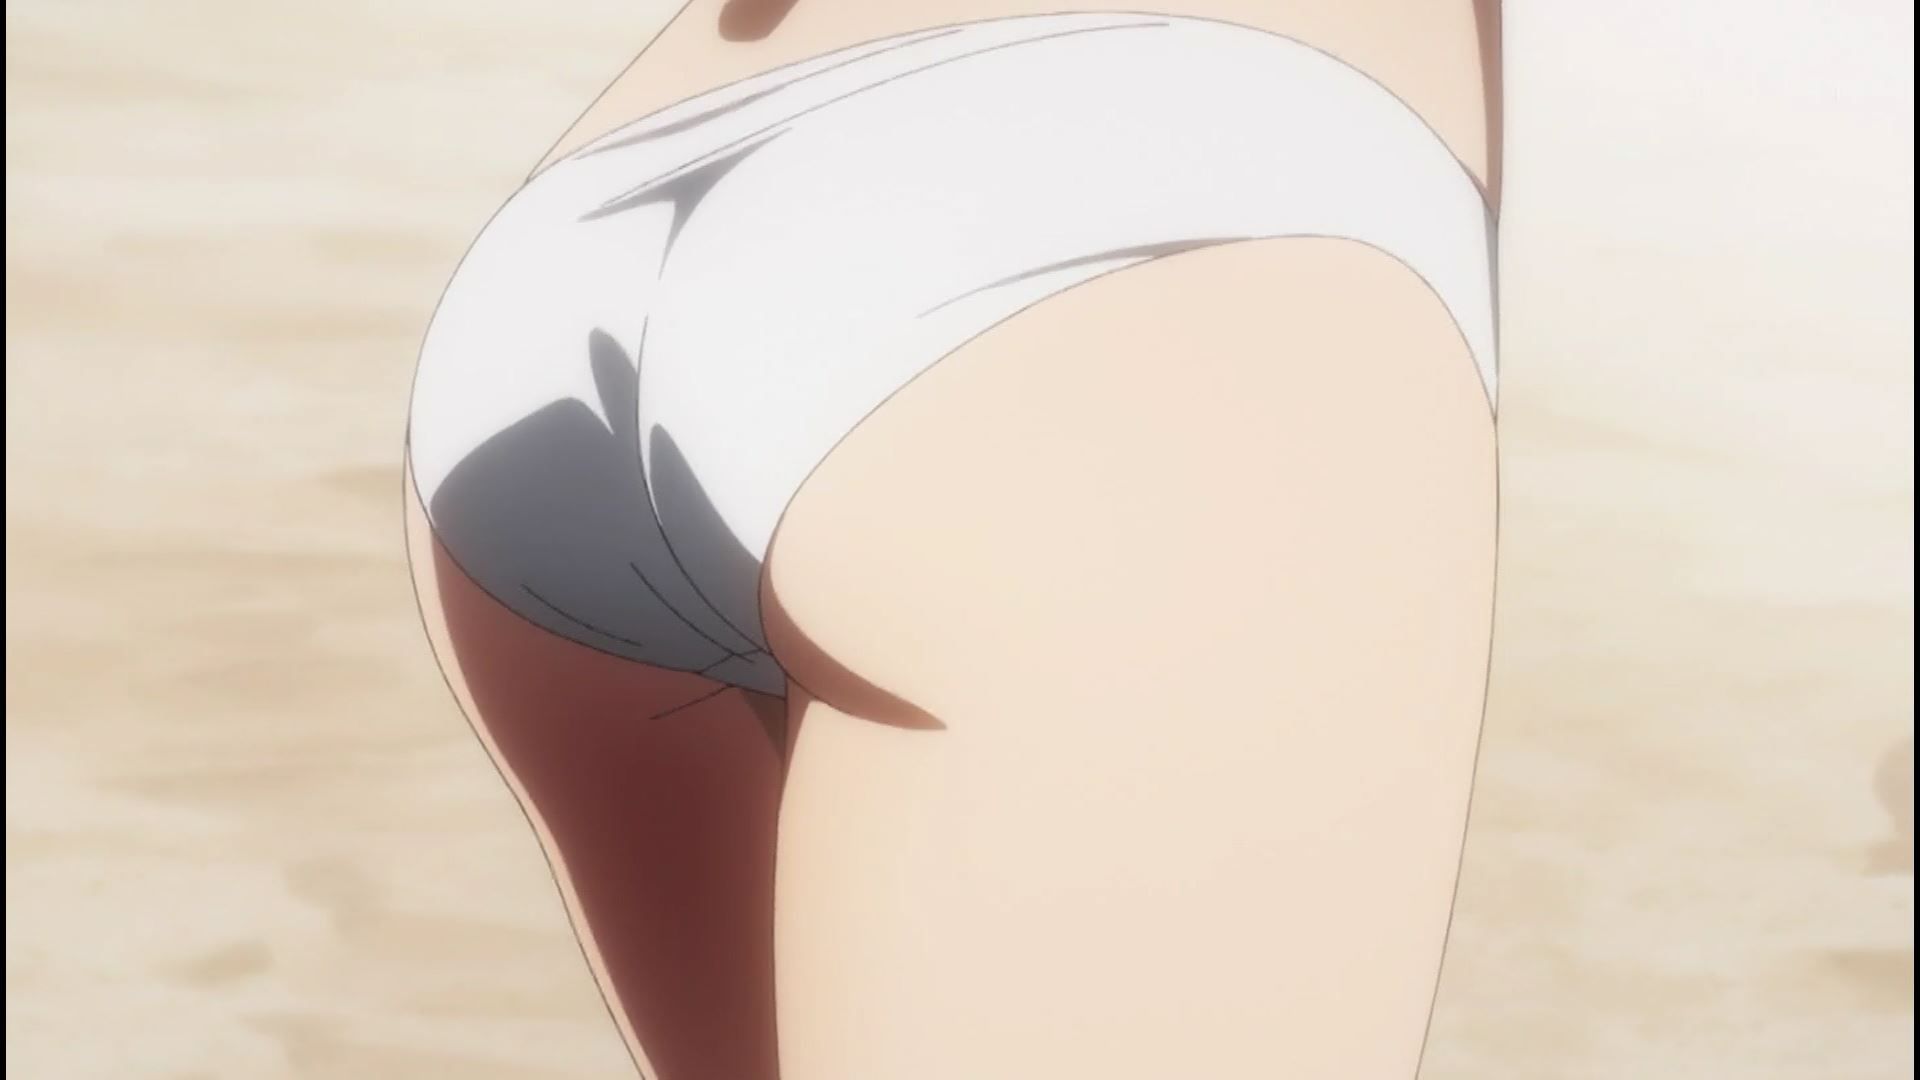 Anime [Darling in the franc kiss] seven girls erotic breasts and buttocks swimsuit times in the story! 6